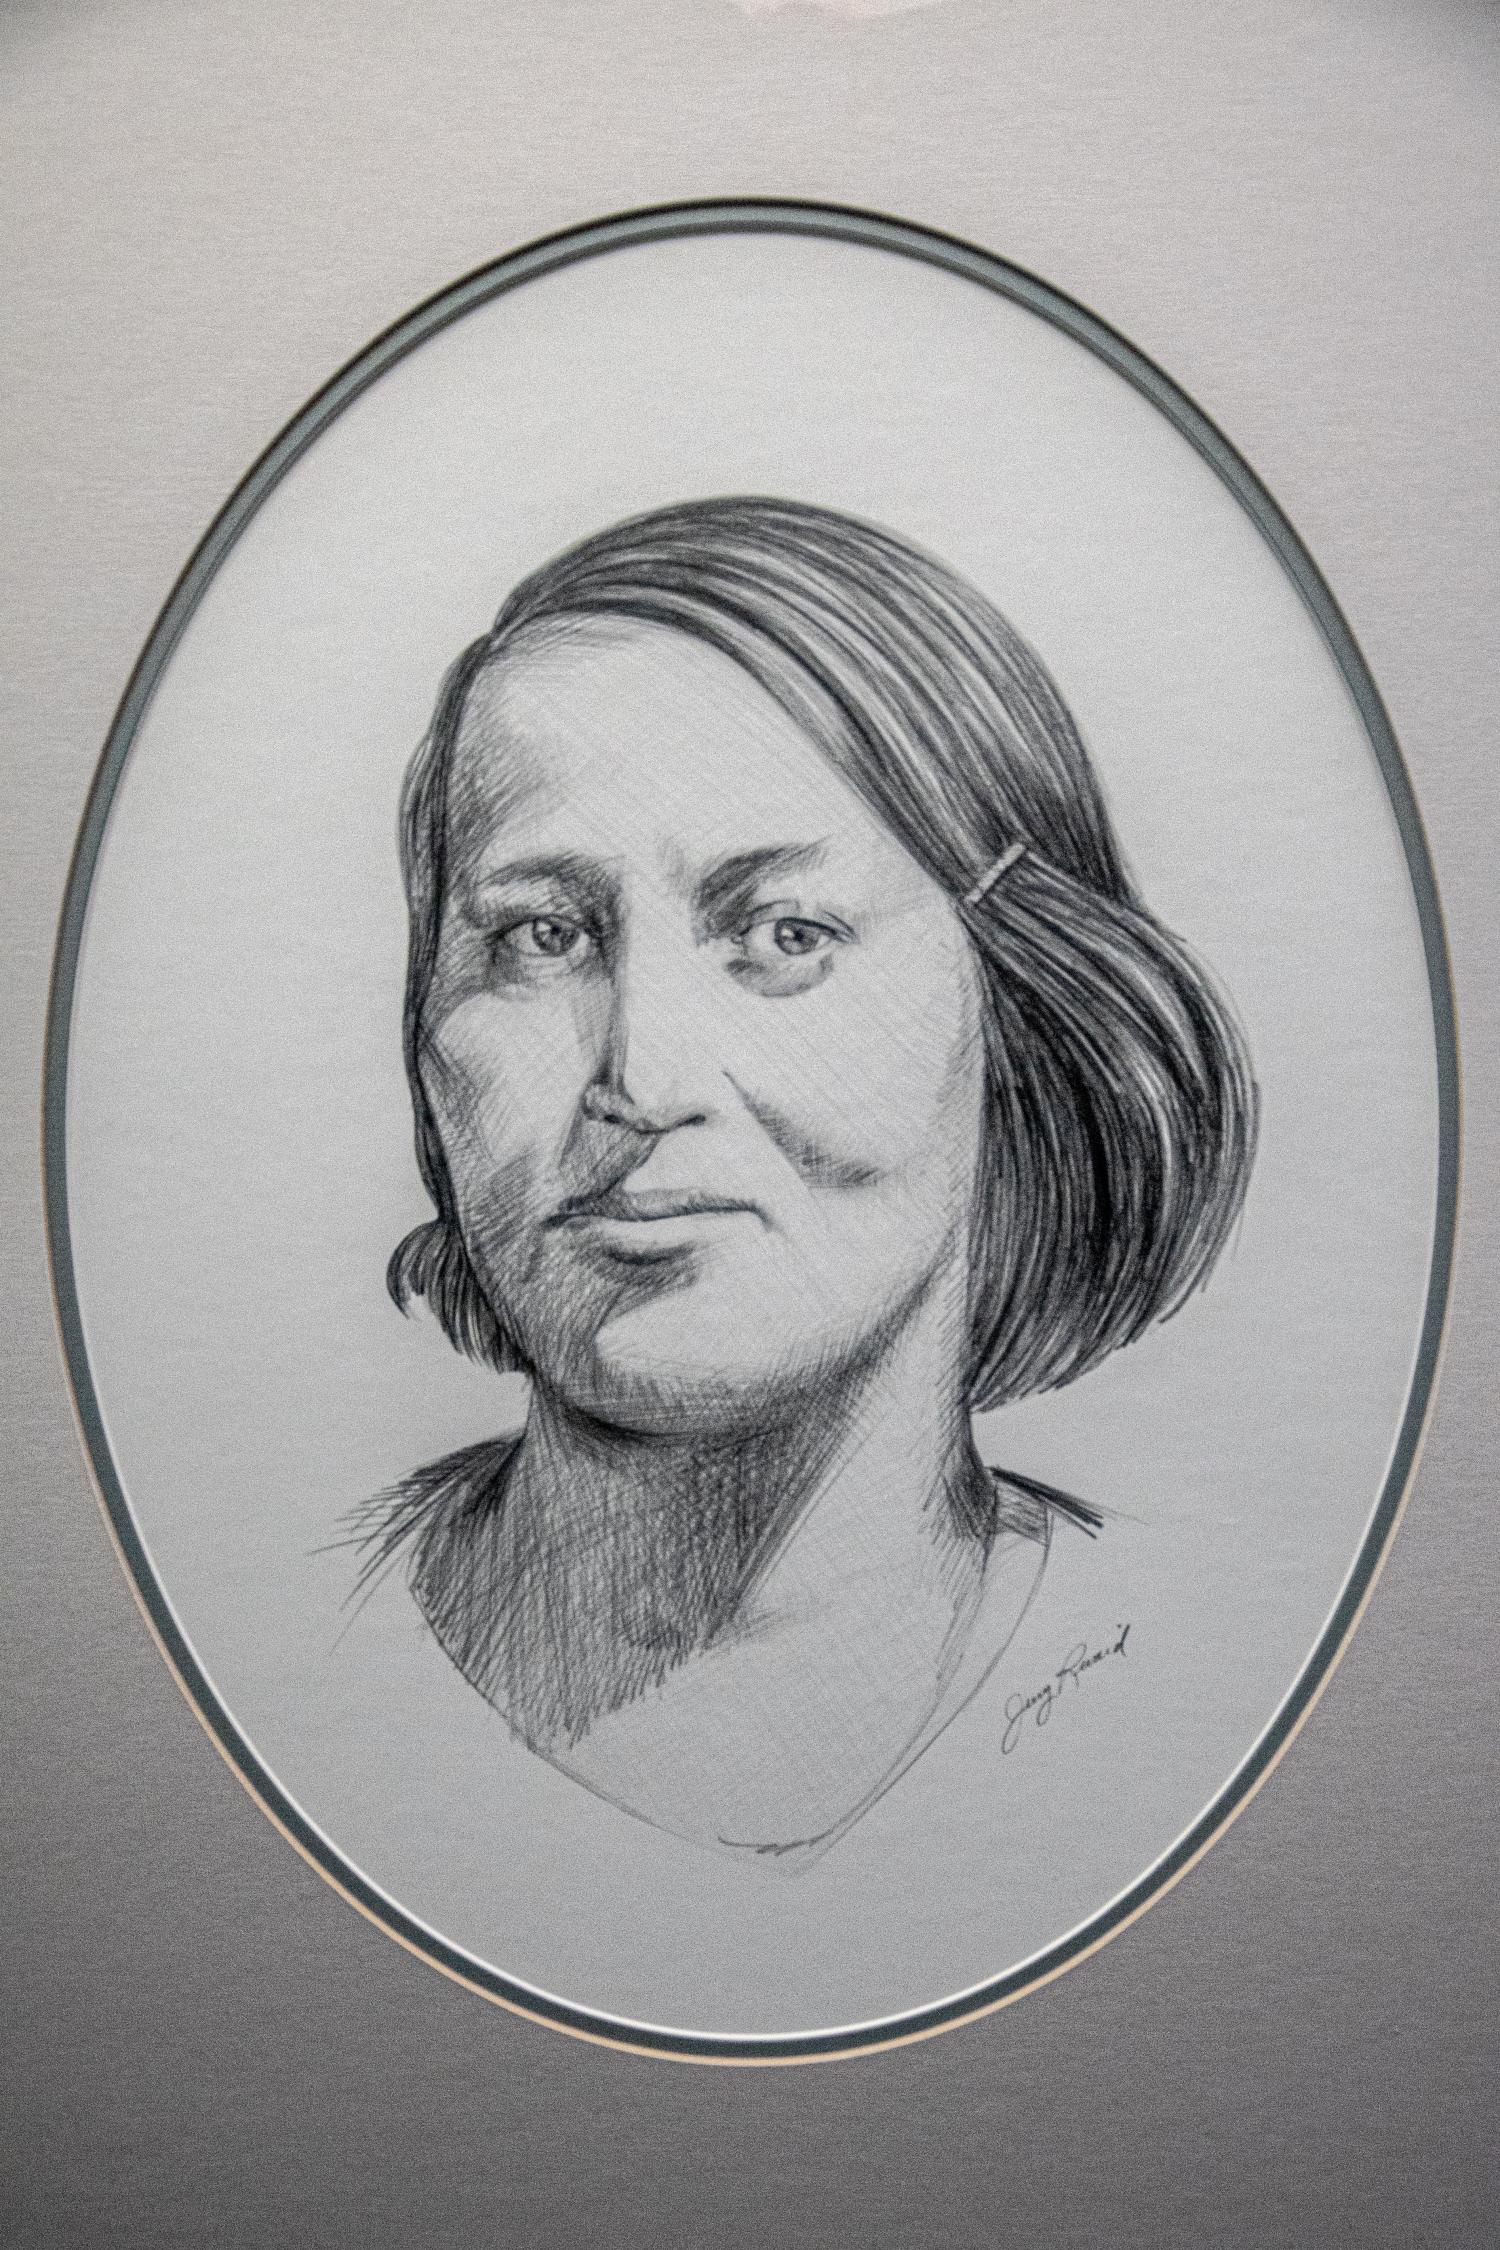  The portrait of Brenda Campbell that hangs in the Native Brotherhood offices.